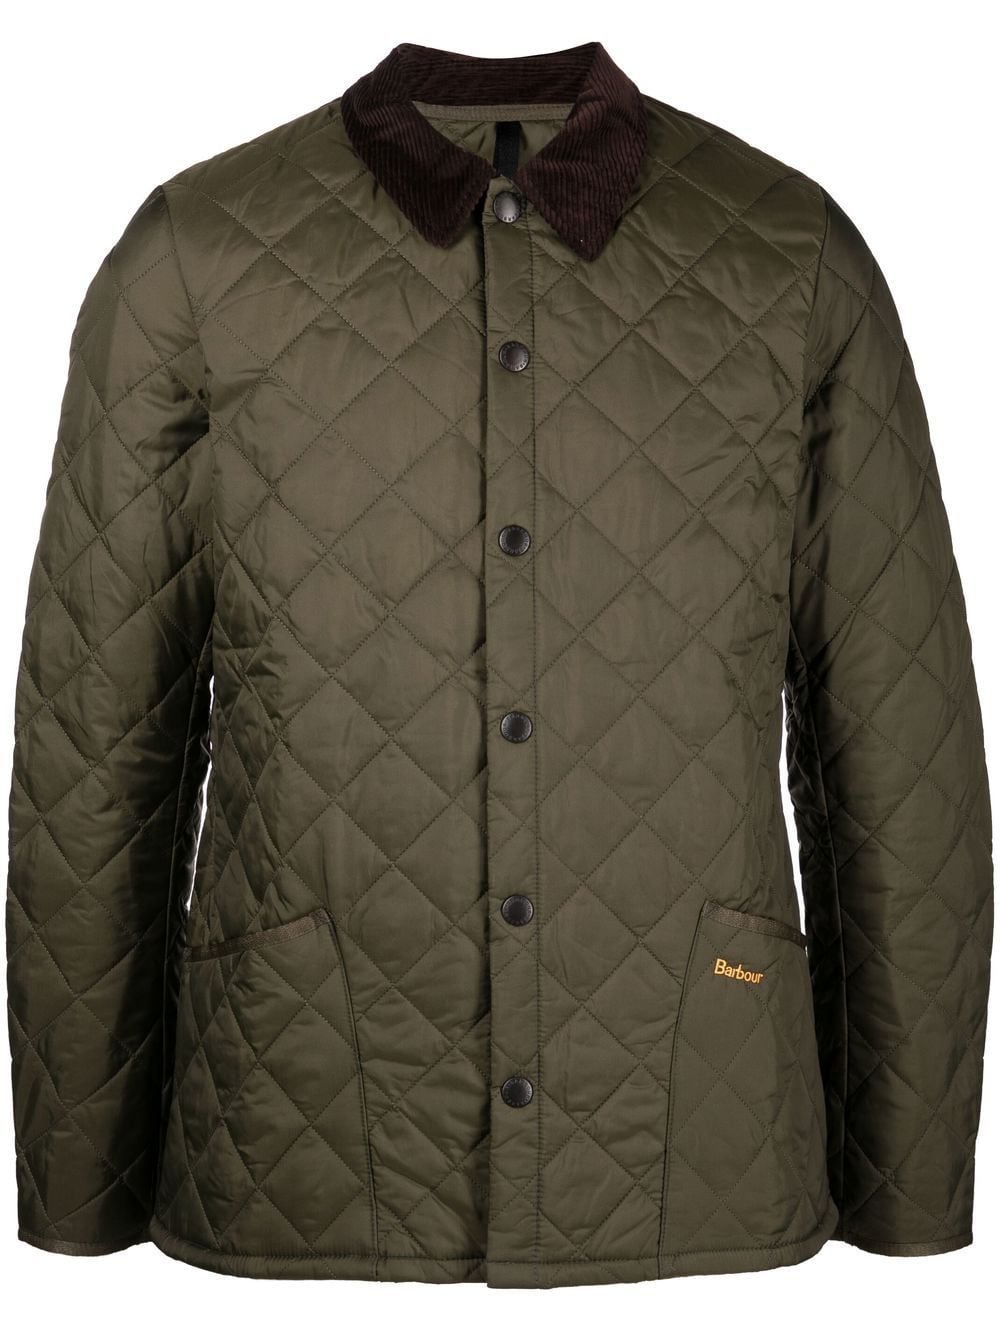 Barbour quilted shirt jacket - Green von Barbour